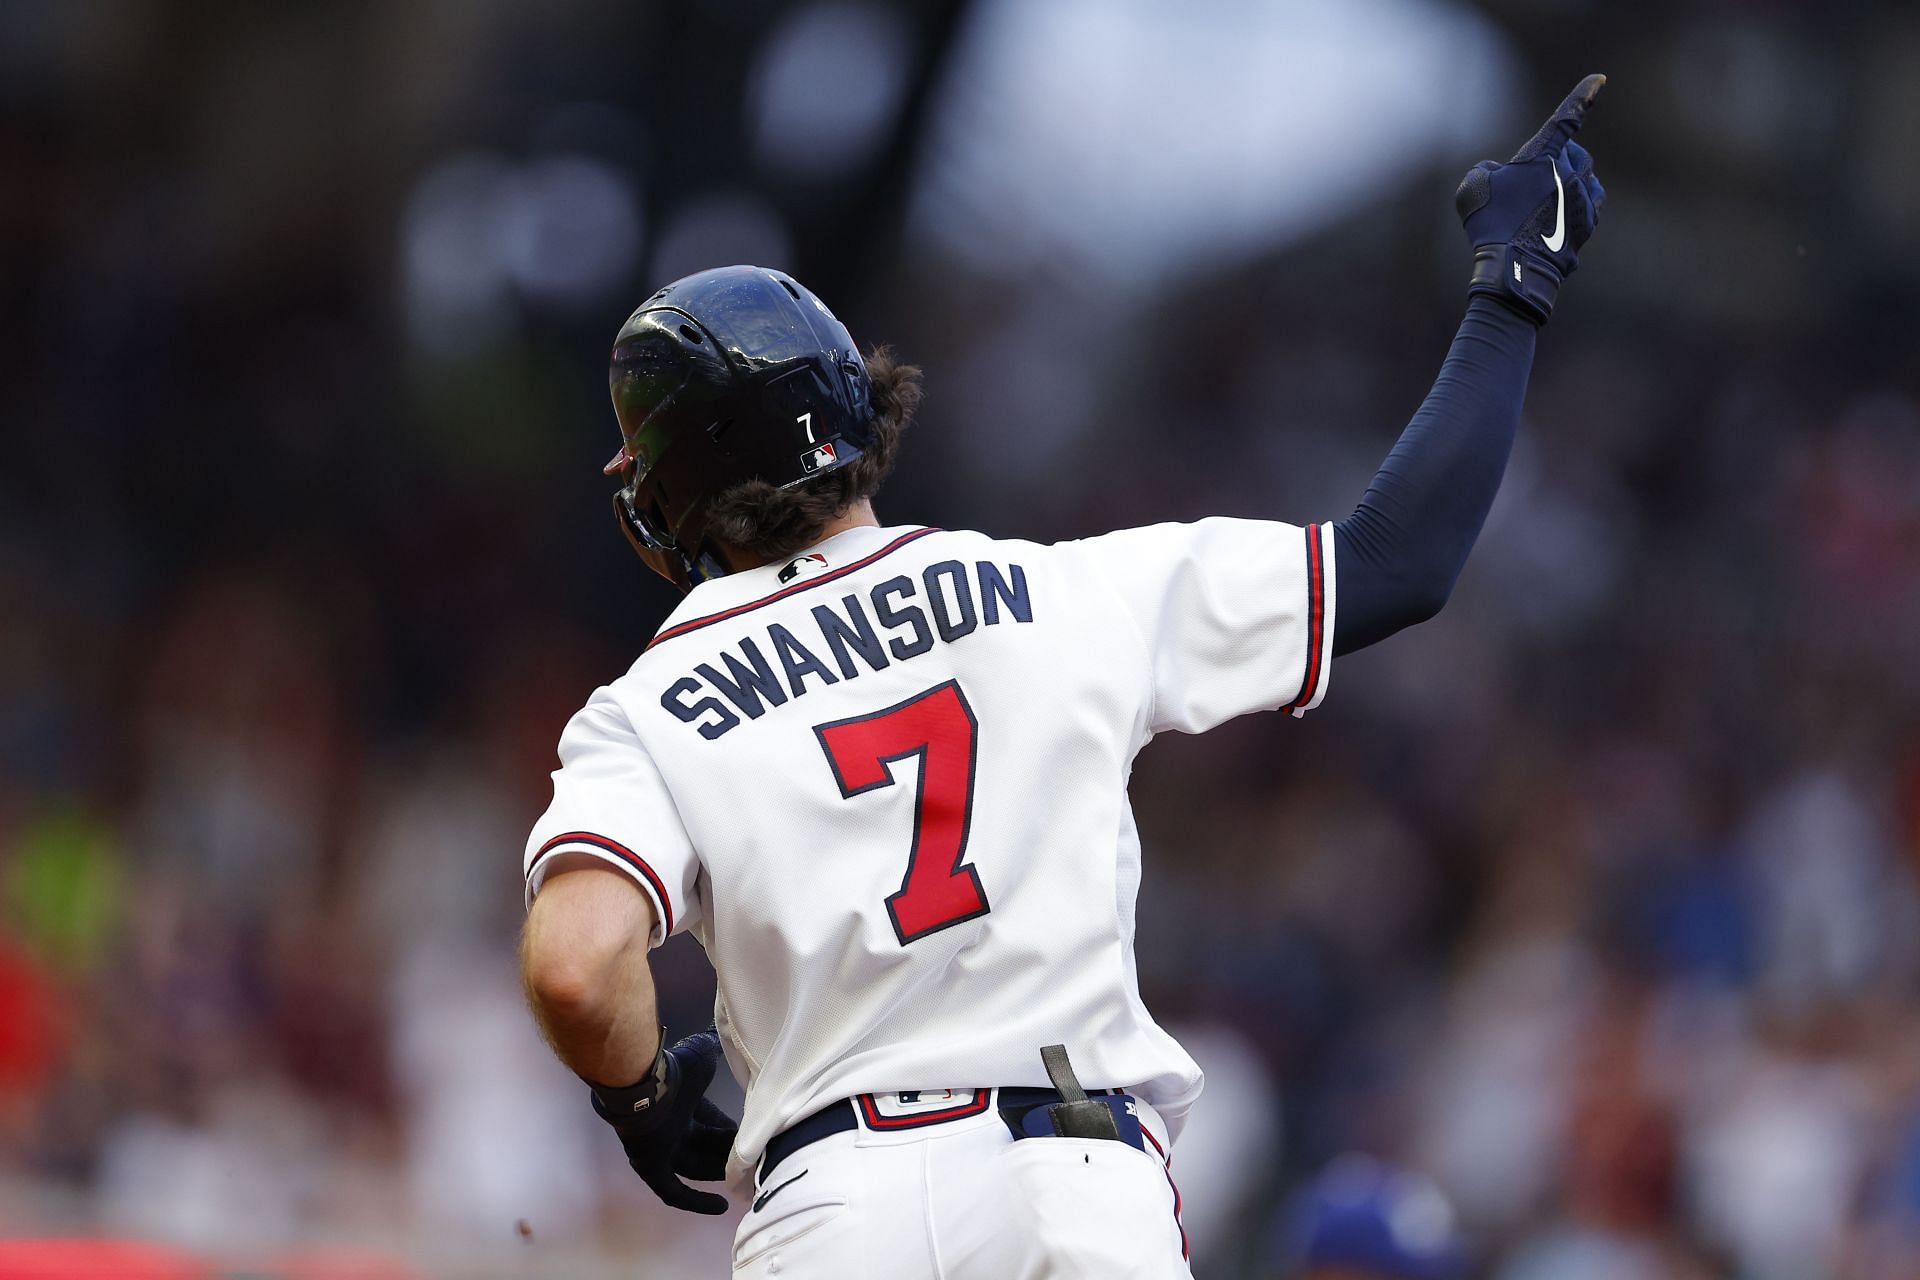 The Atlanta Braves Can't Afford To Lose Gold Glove Shortstop Dansby Swanson